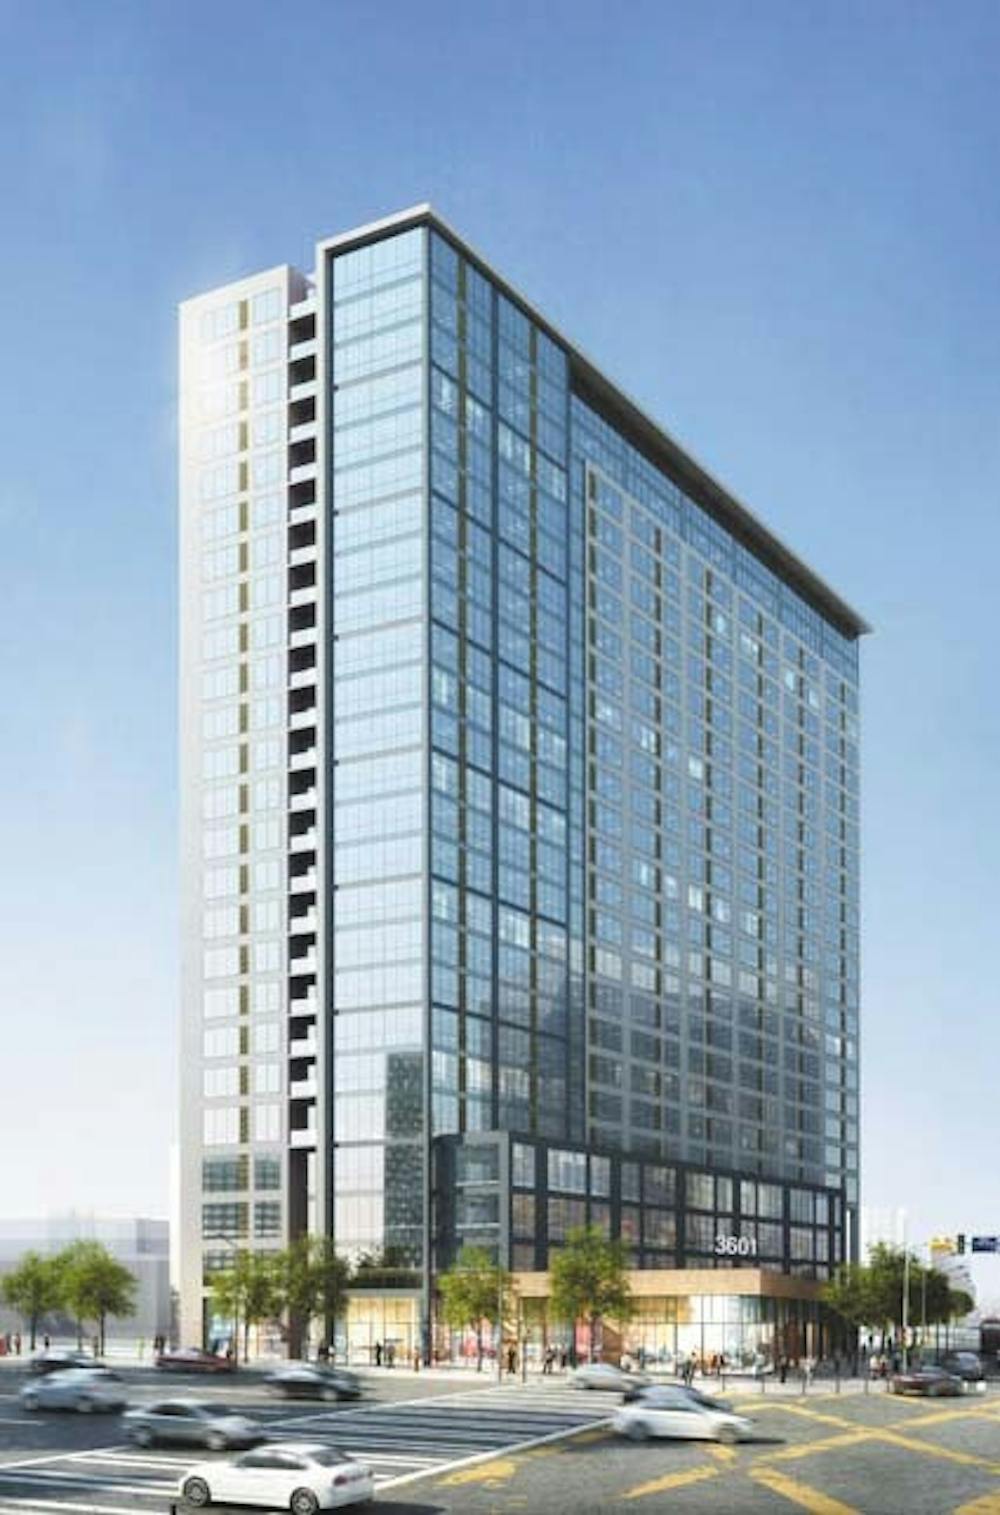 rendering_of_new_residential_building_at_3601_market_street_on_the_science_center_campus